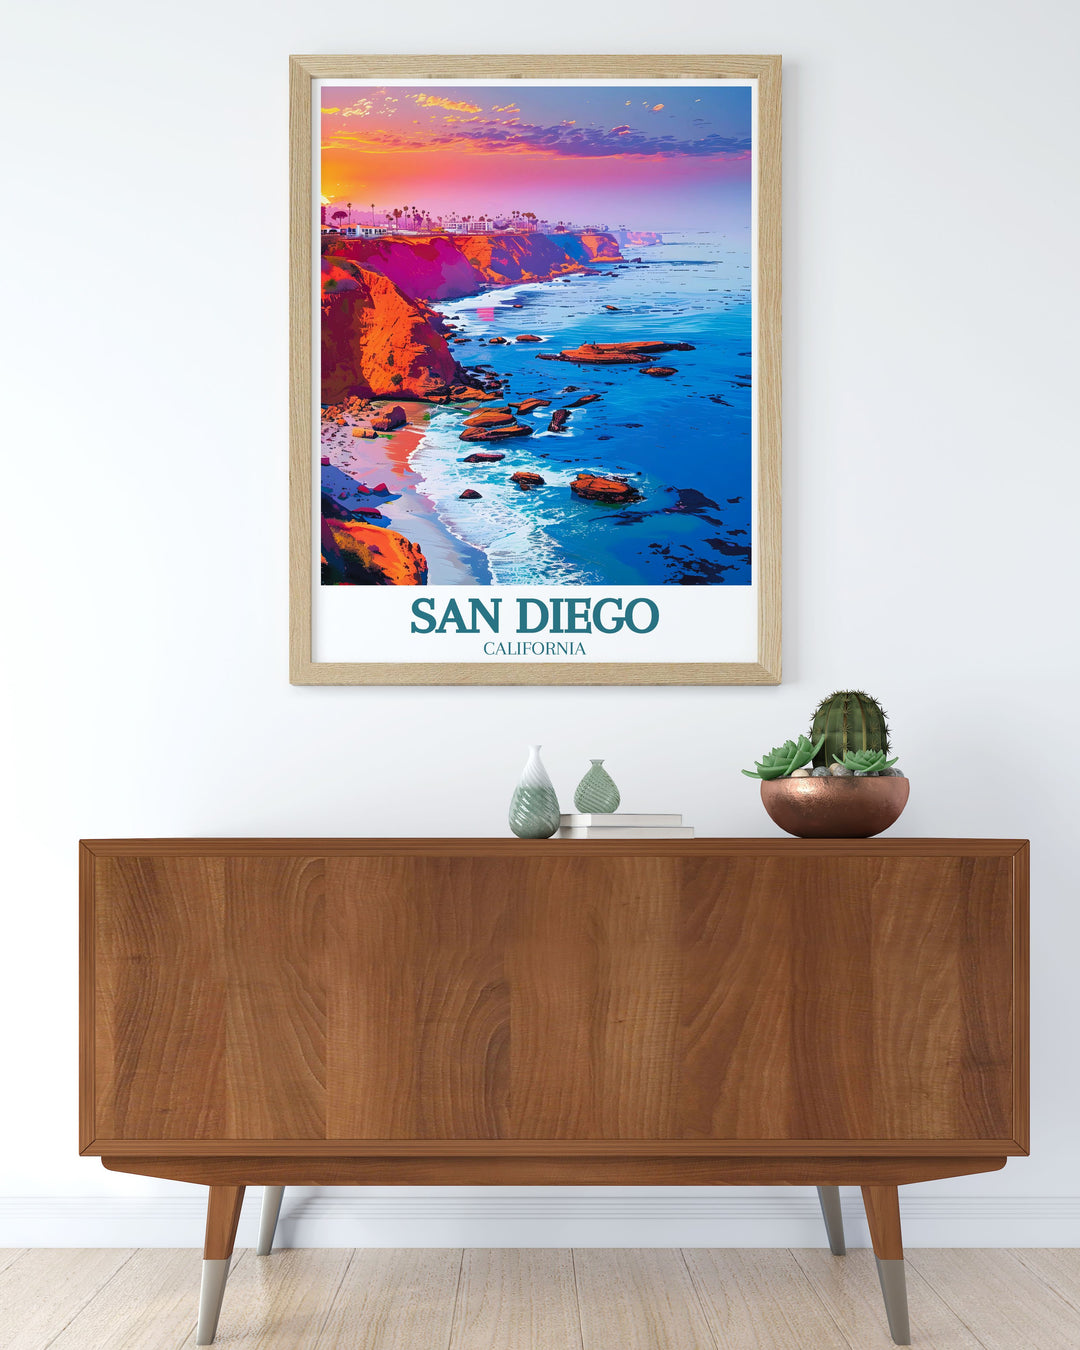 La Jolla Cove poster highlighting the breathtaking landscapes of San Diego. This California print is perfect for those who love California travel and art. A unique addition to your wall art collection, bringing the serene beauty of La Jolla Cove to your home.